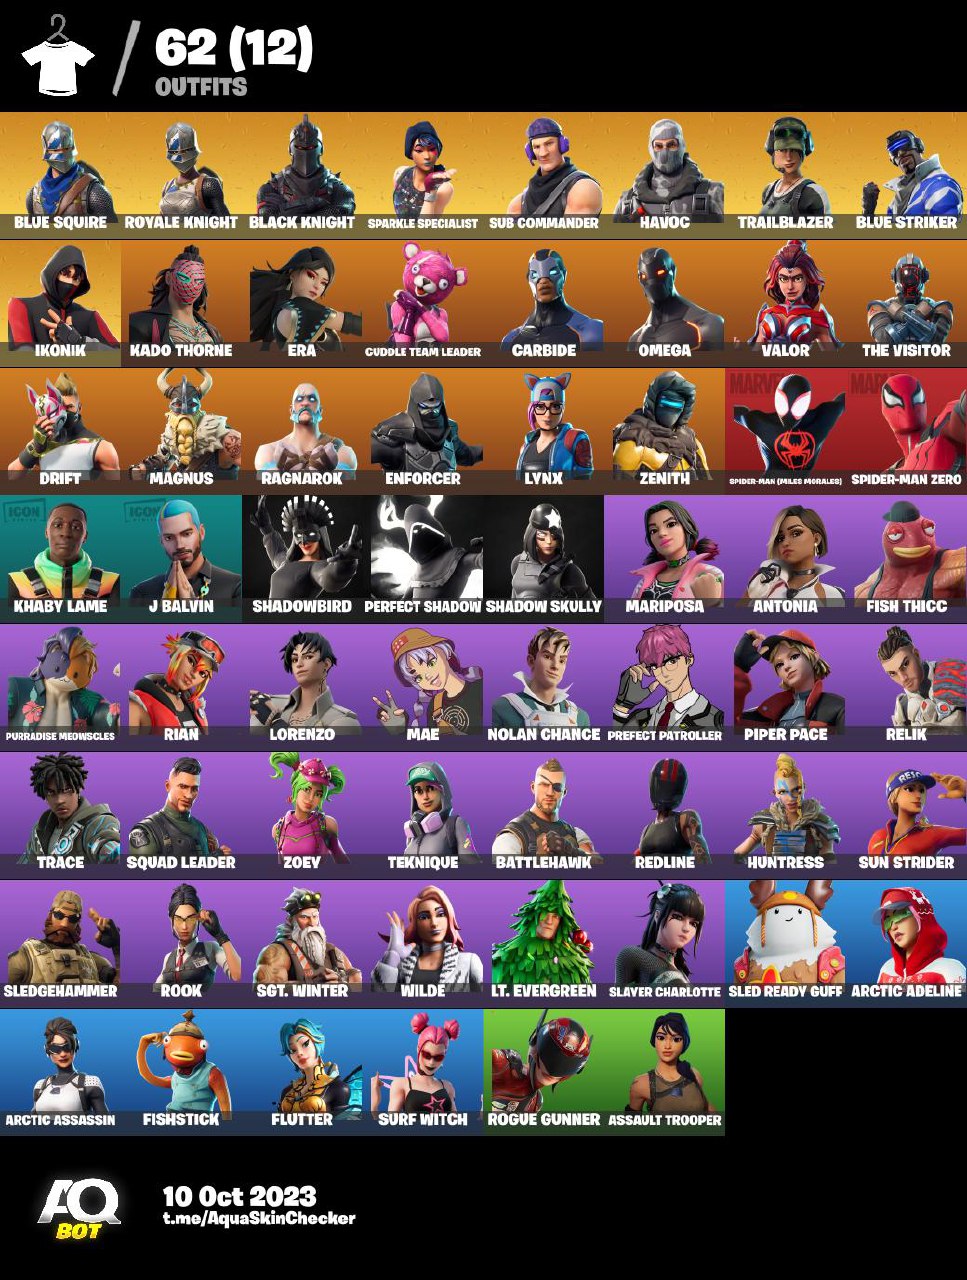 62 Skins/Full mail access/Black Knight/Ikonik/Carbide Stage 5/Blue Squire/Floss/Battle Bus Banner/Sub Commander/Havoc